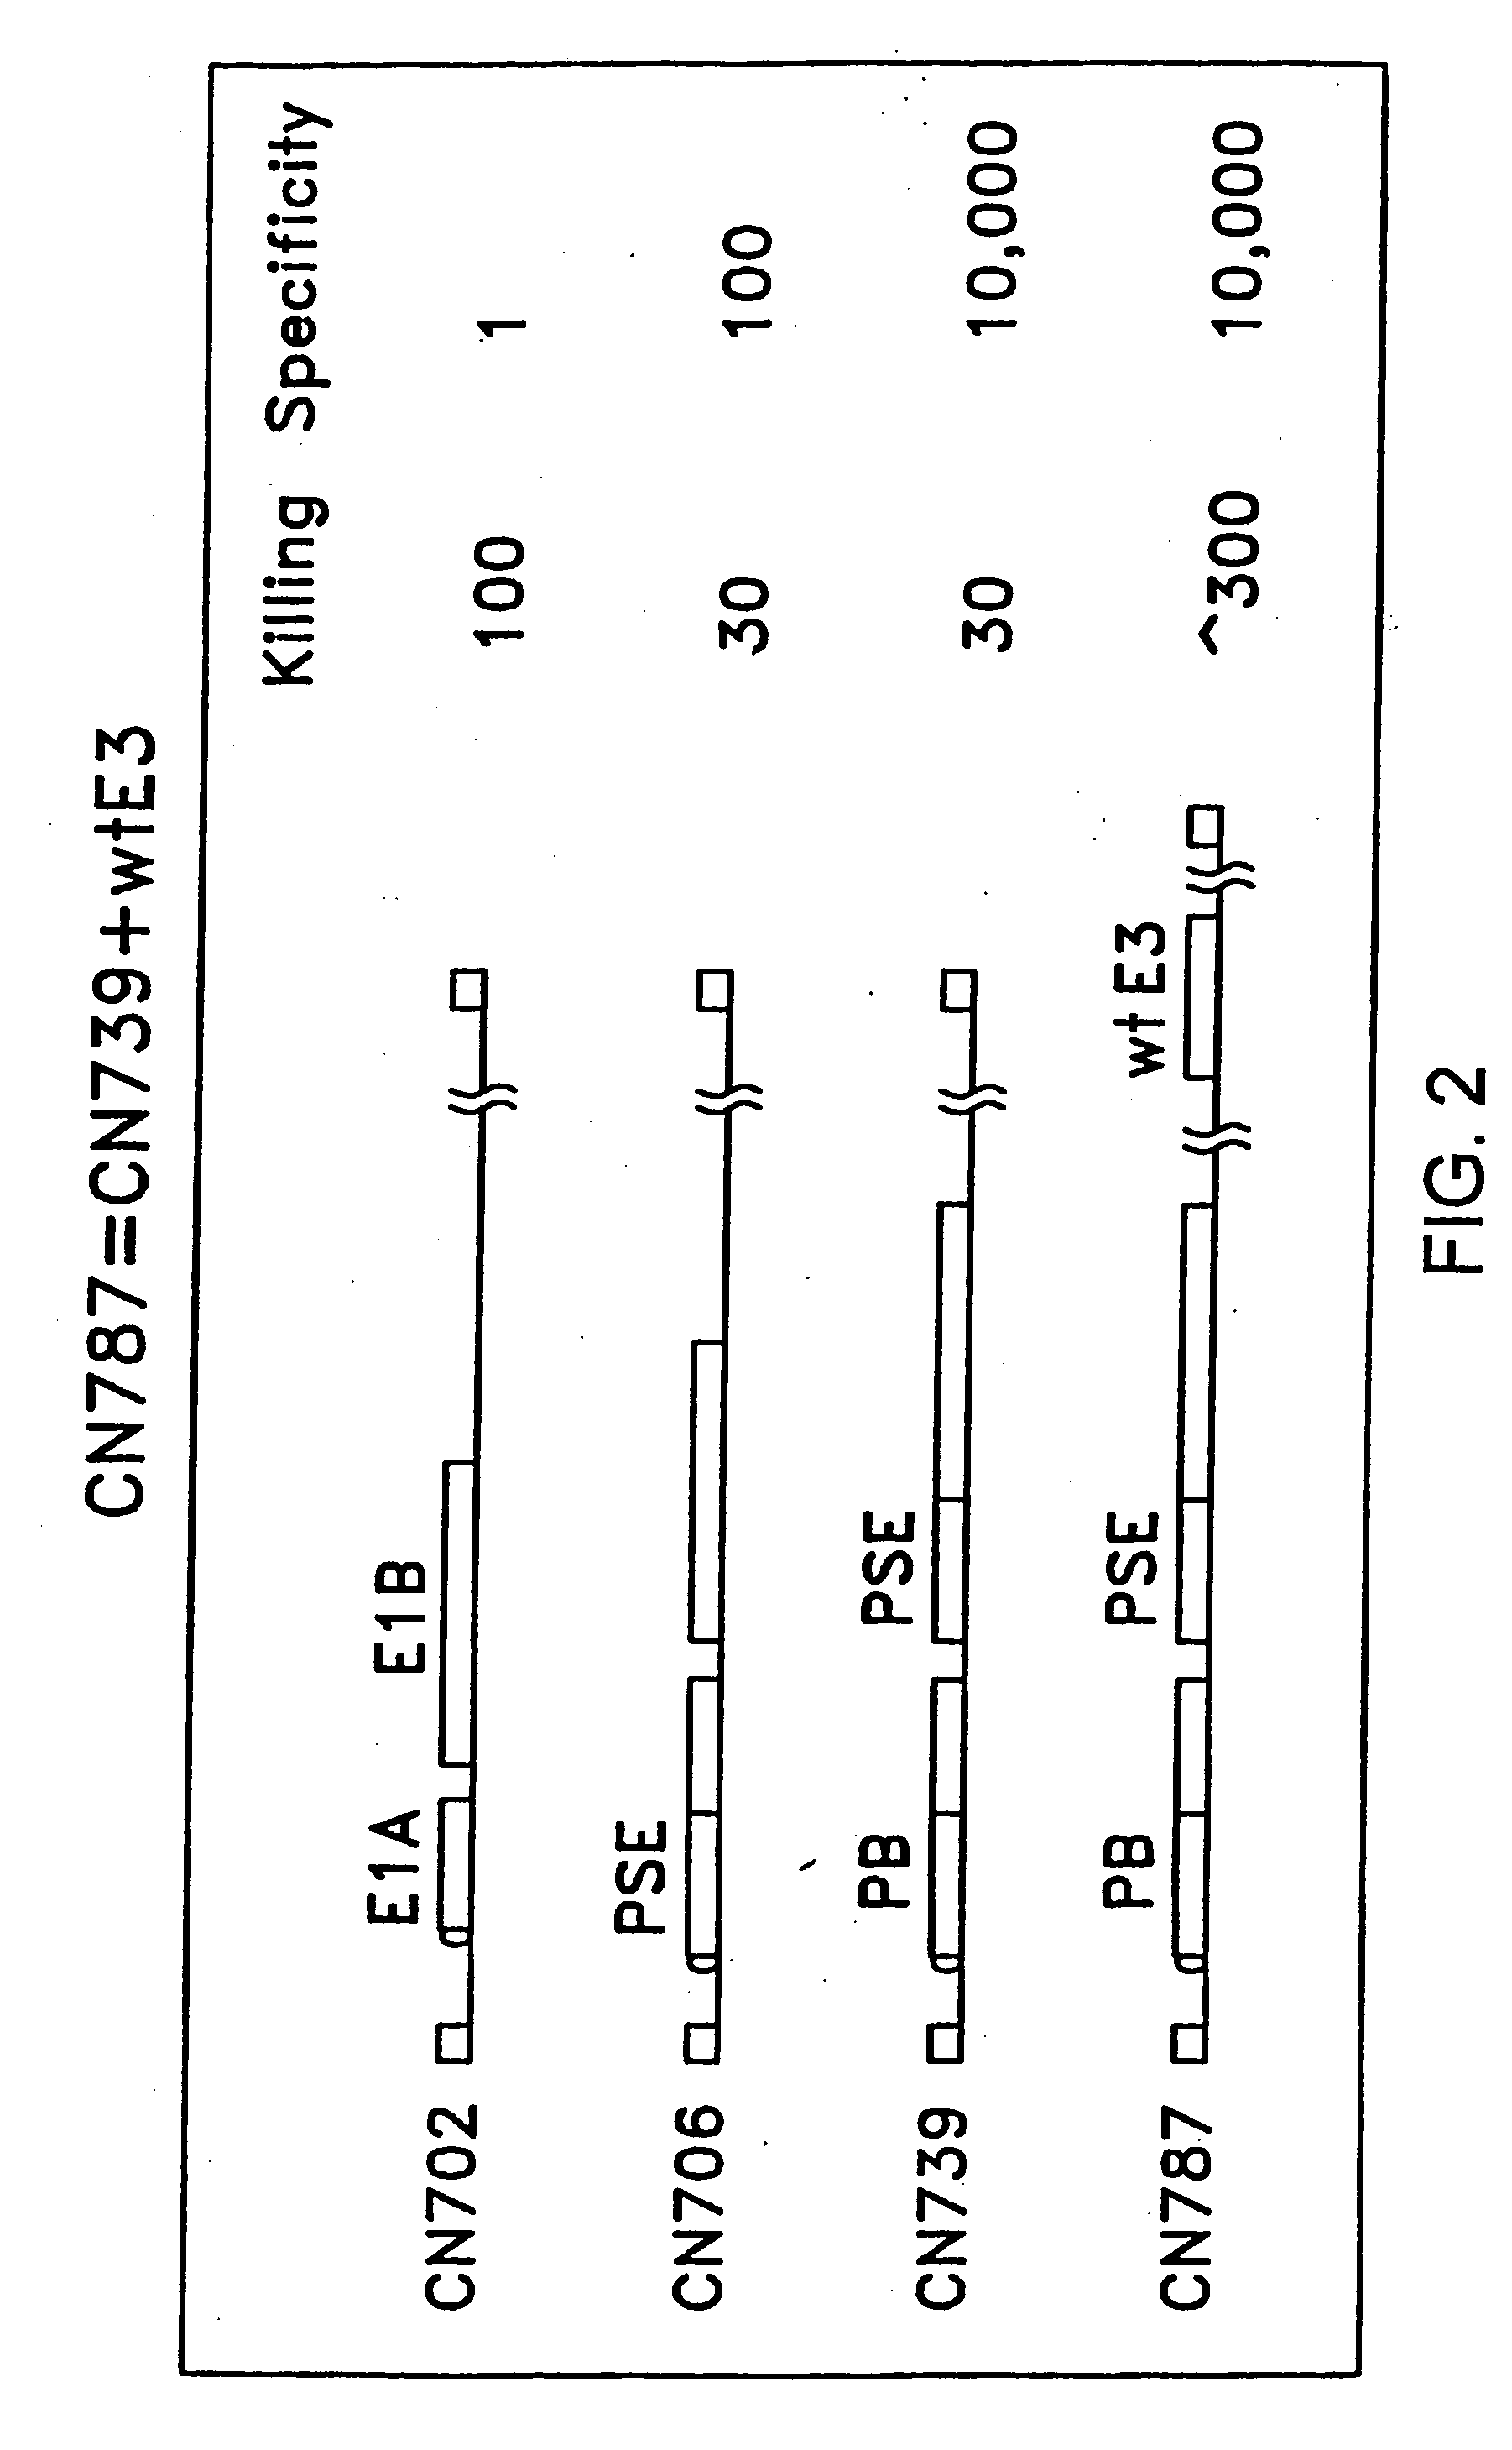 Target cell-specific adenoviral vectors containing E3 and methods of use thereof